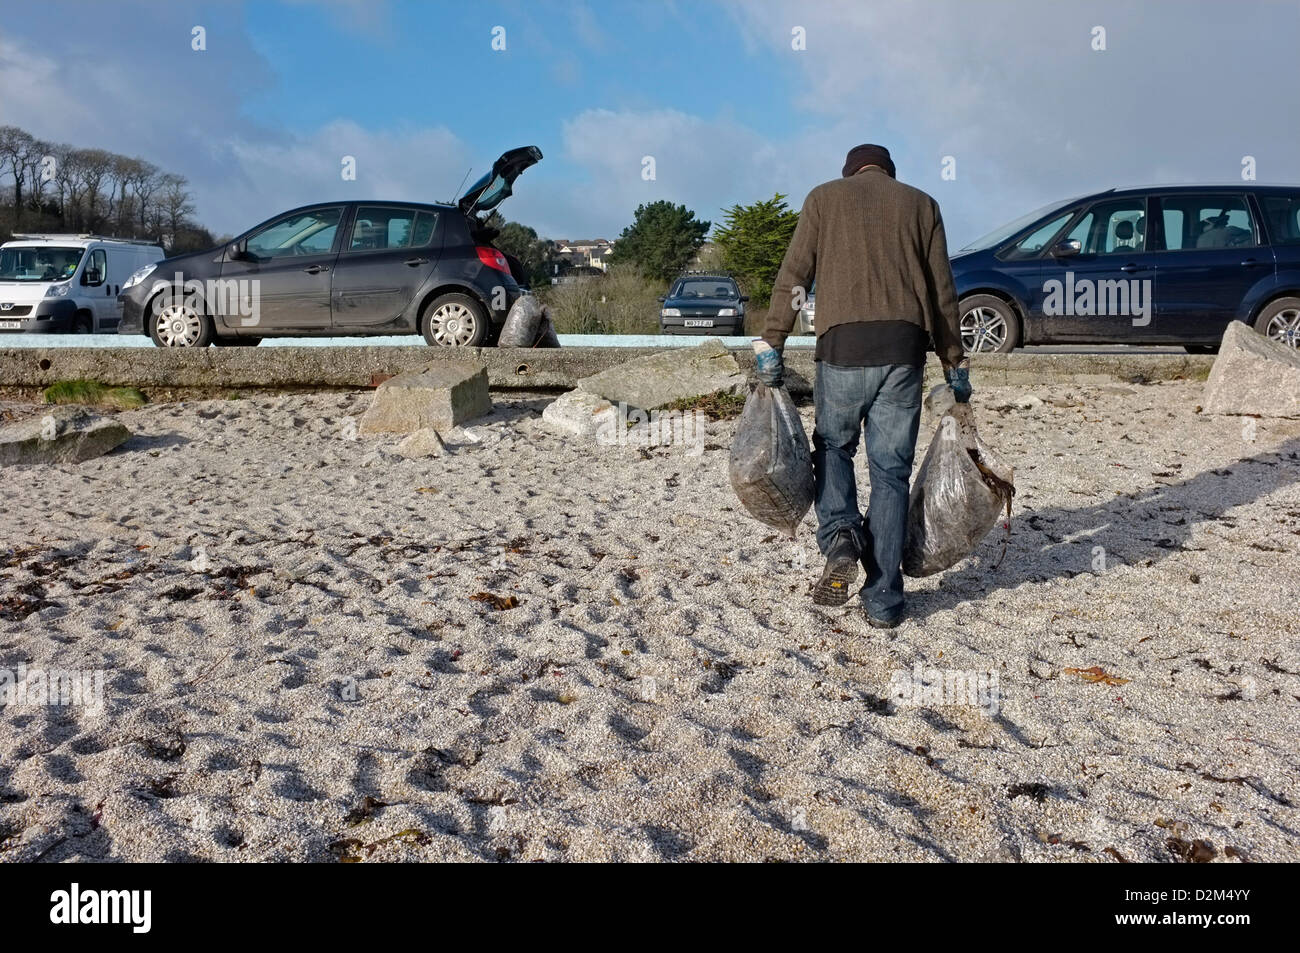 A man carries seaweed from a beach in Cornwall, UK Stock Photo